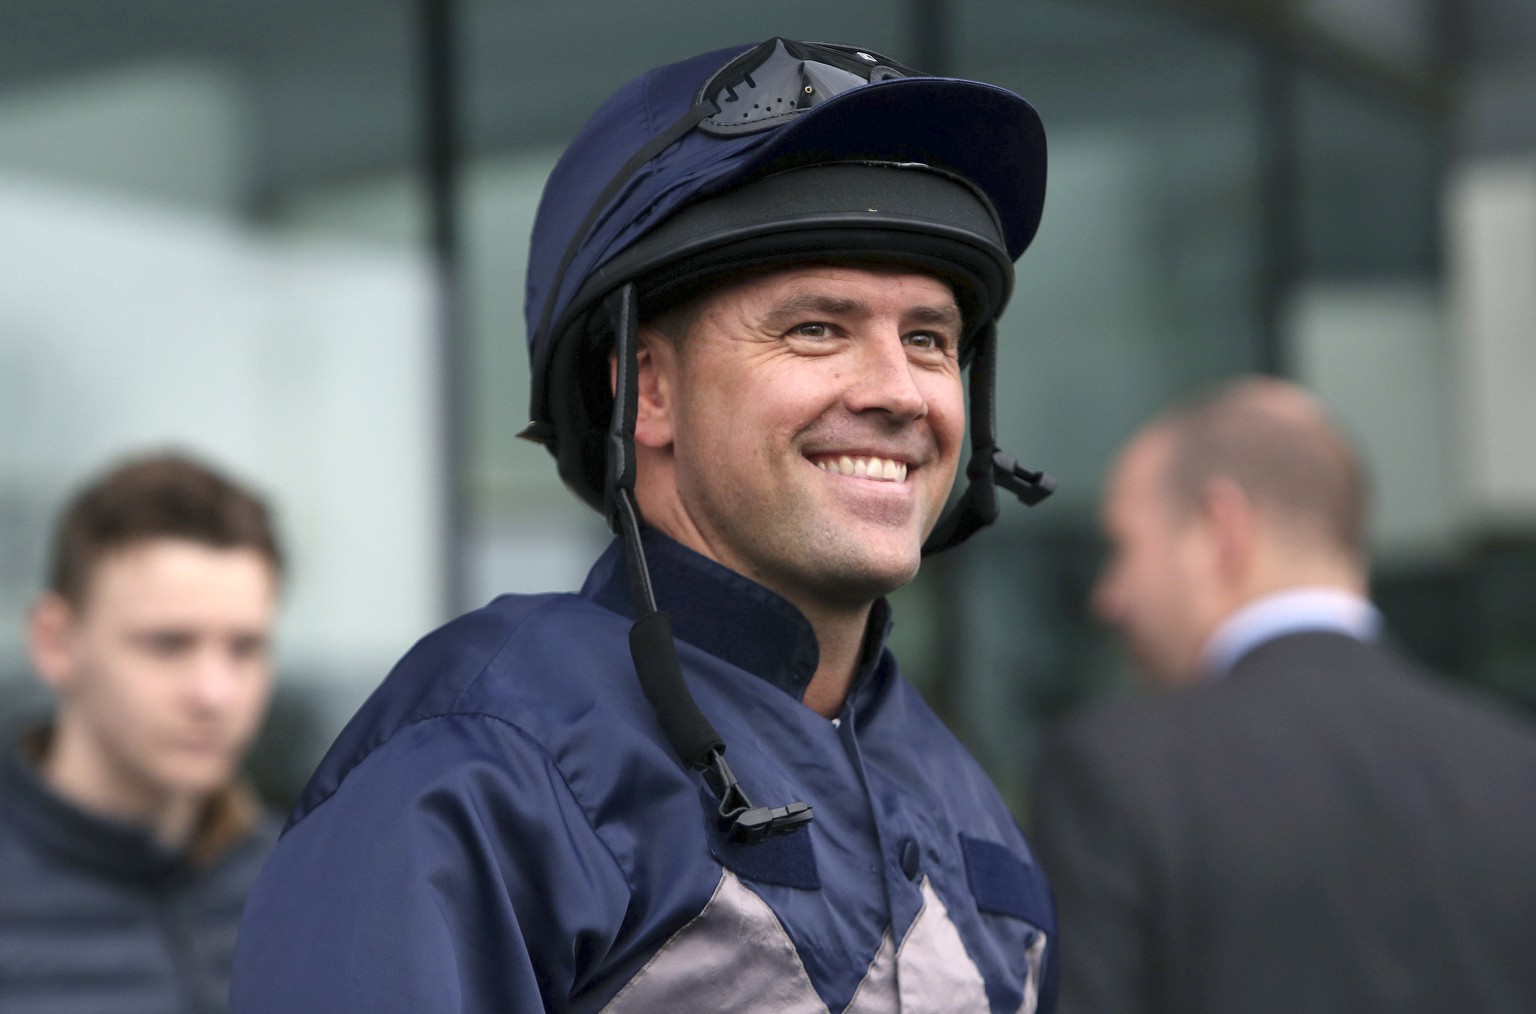 Former England soccer player Michael Owen smiles prior to riding Calder Prince in the Prince&#039;s Countryside Fund race at Ascot Racourse, Friday Nov. 24, 2017. (Steve Parsons/PA via AP)